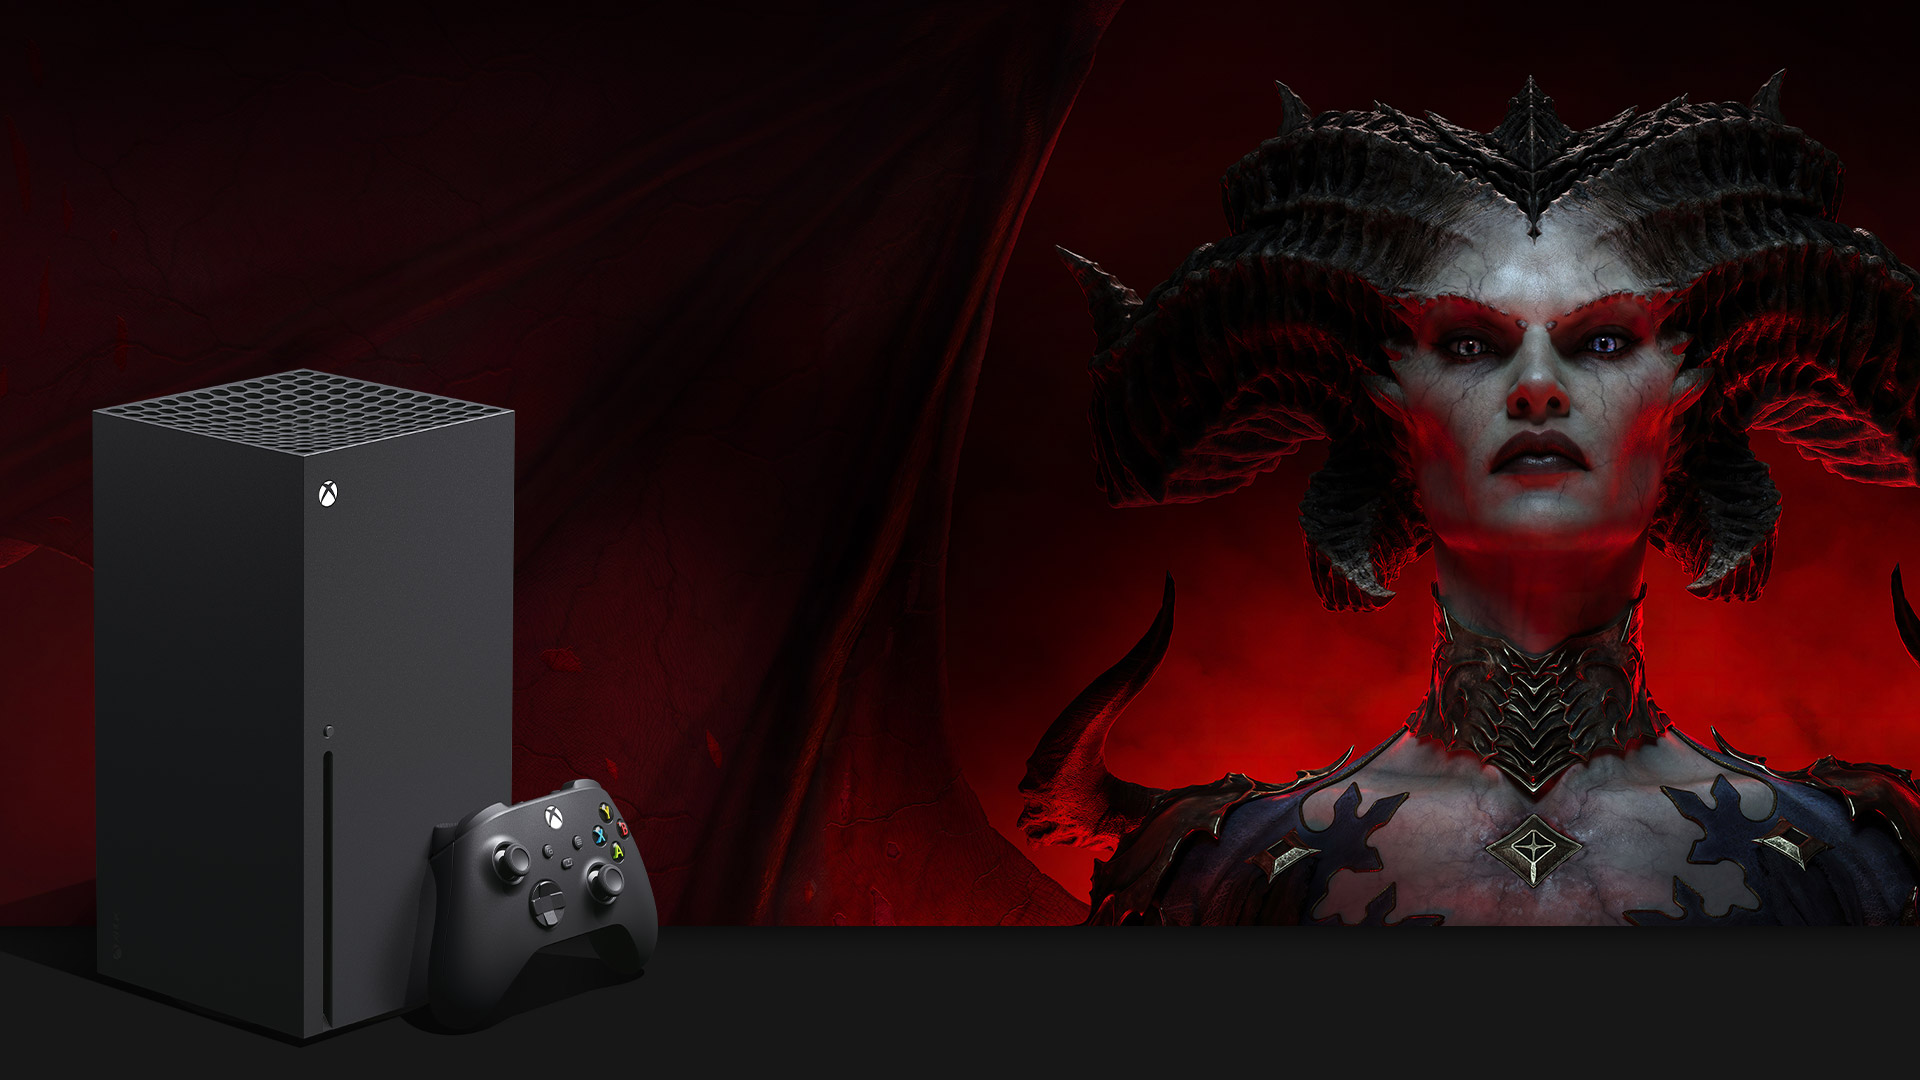 Close up of Lilith from Diablo IV with Xbox Series X.